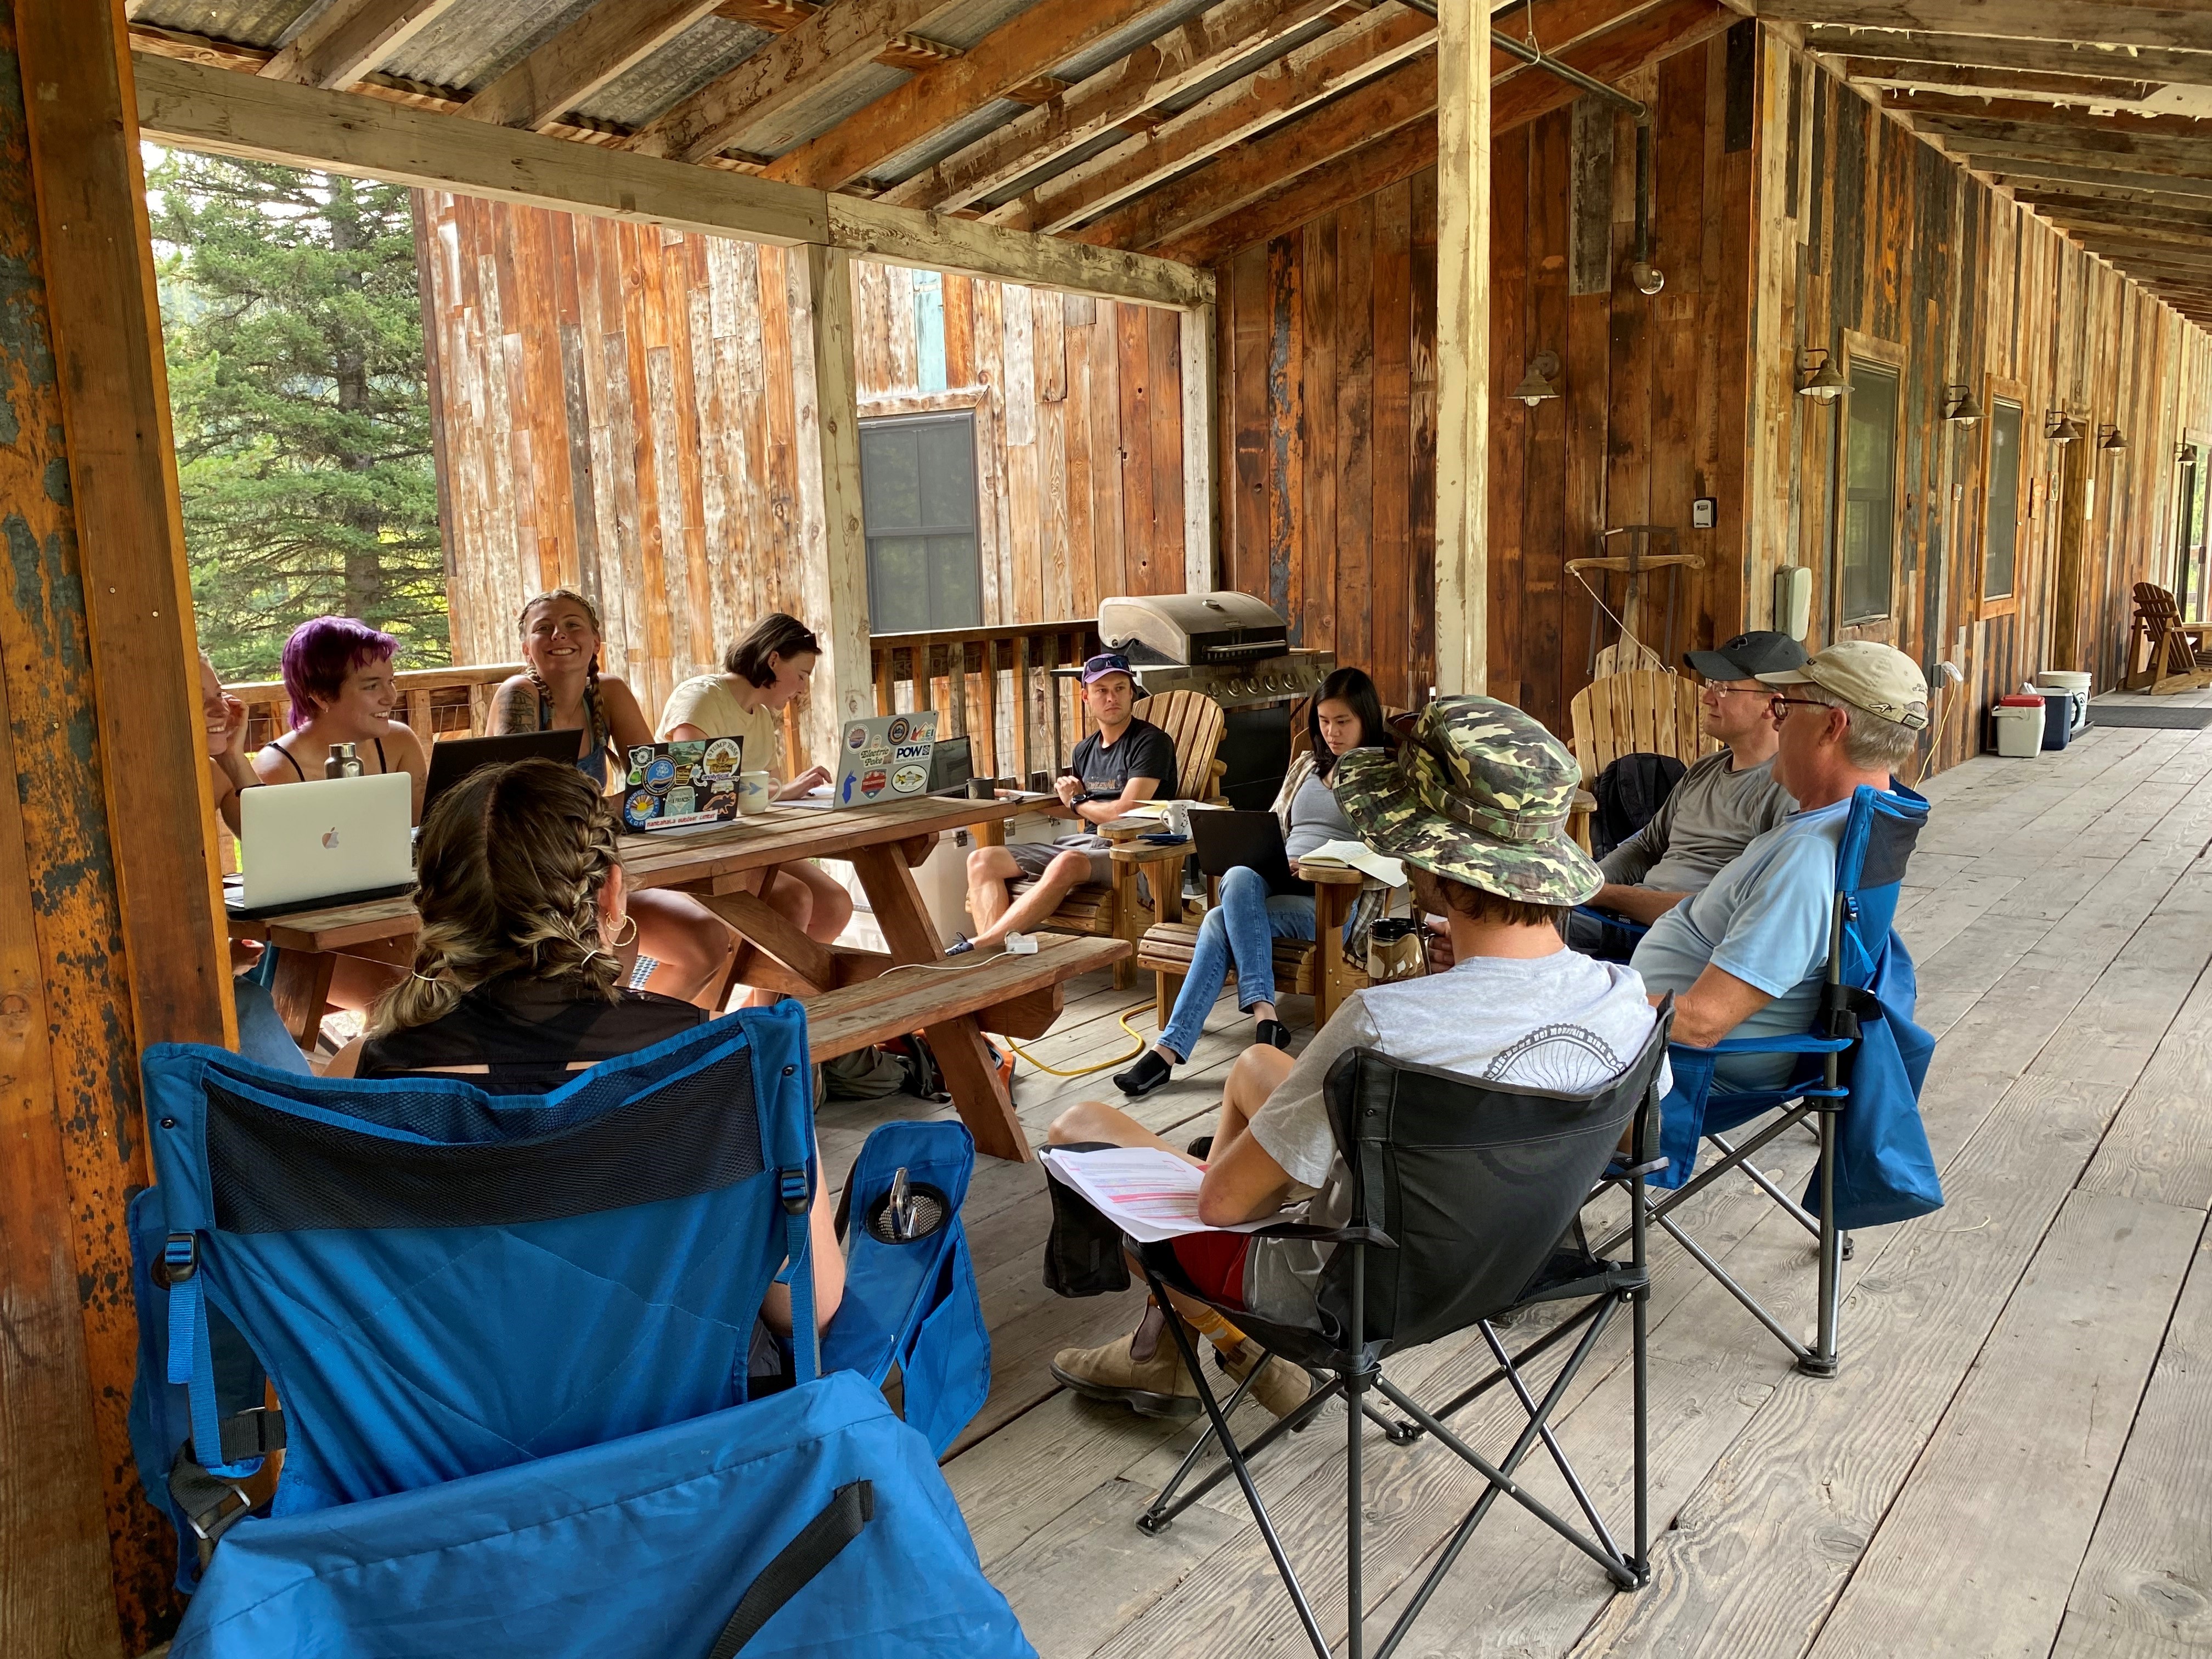 NRT trainees and faculty plan their field sampling trip during the NRT annual retreat in Big Sky Montana.